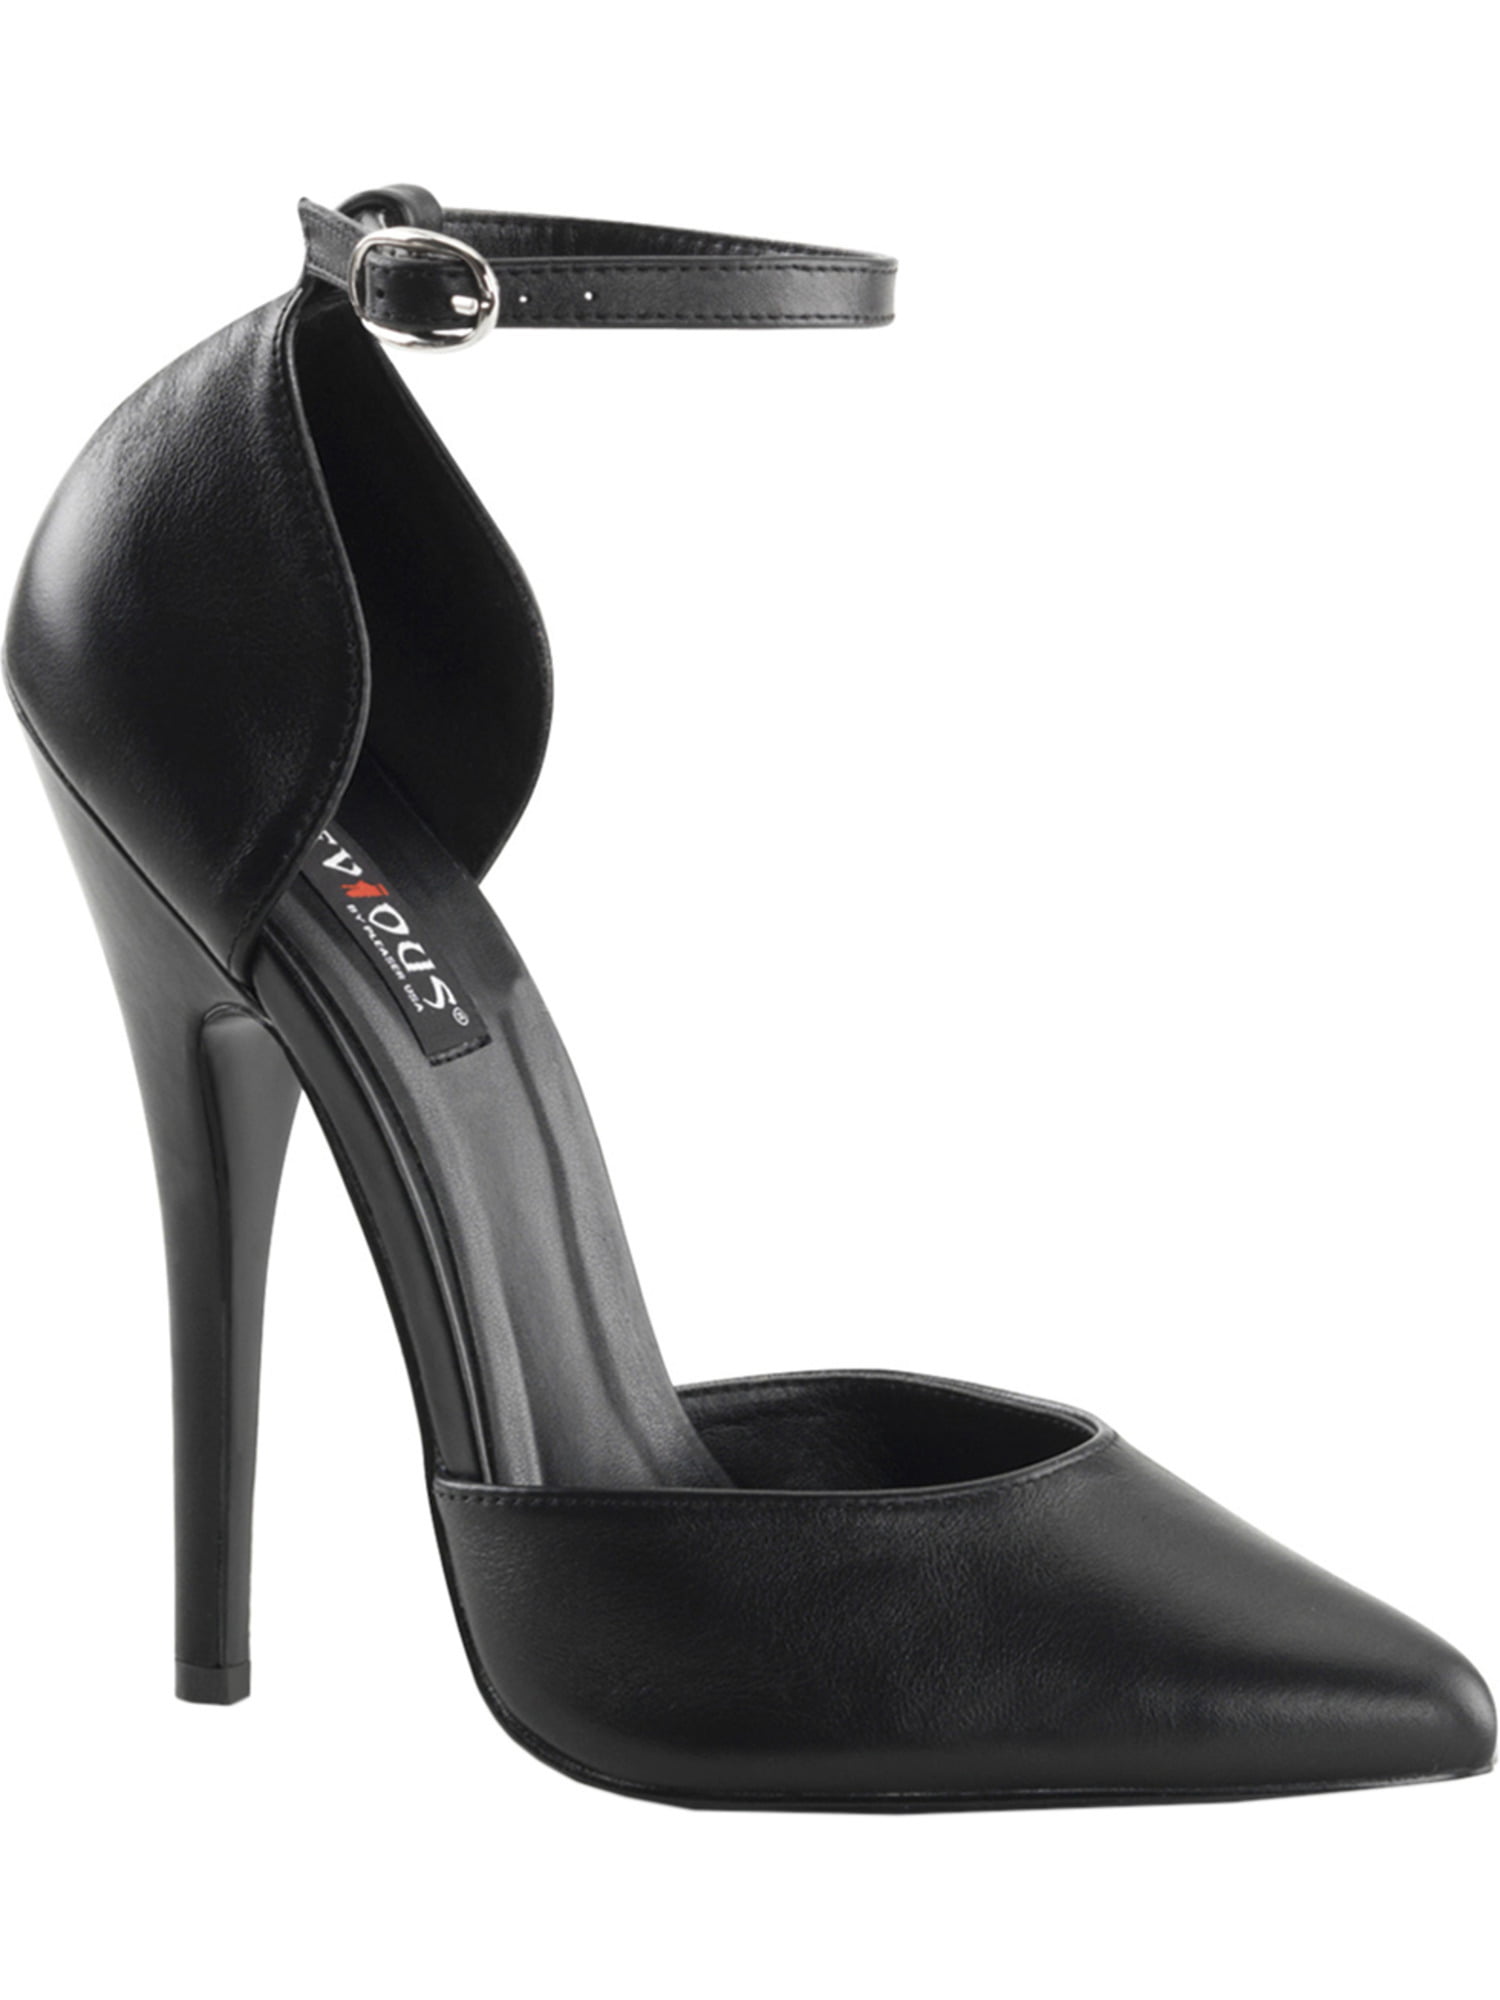 SummitFashions - 6 Inch Sexy High Heel Shoe D'Orsay Pump With Ankle ...